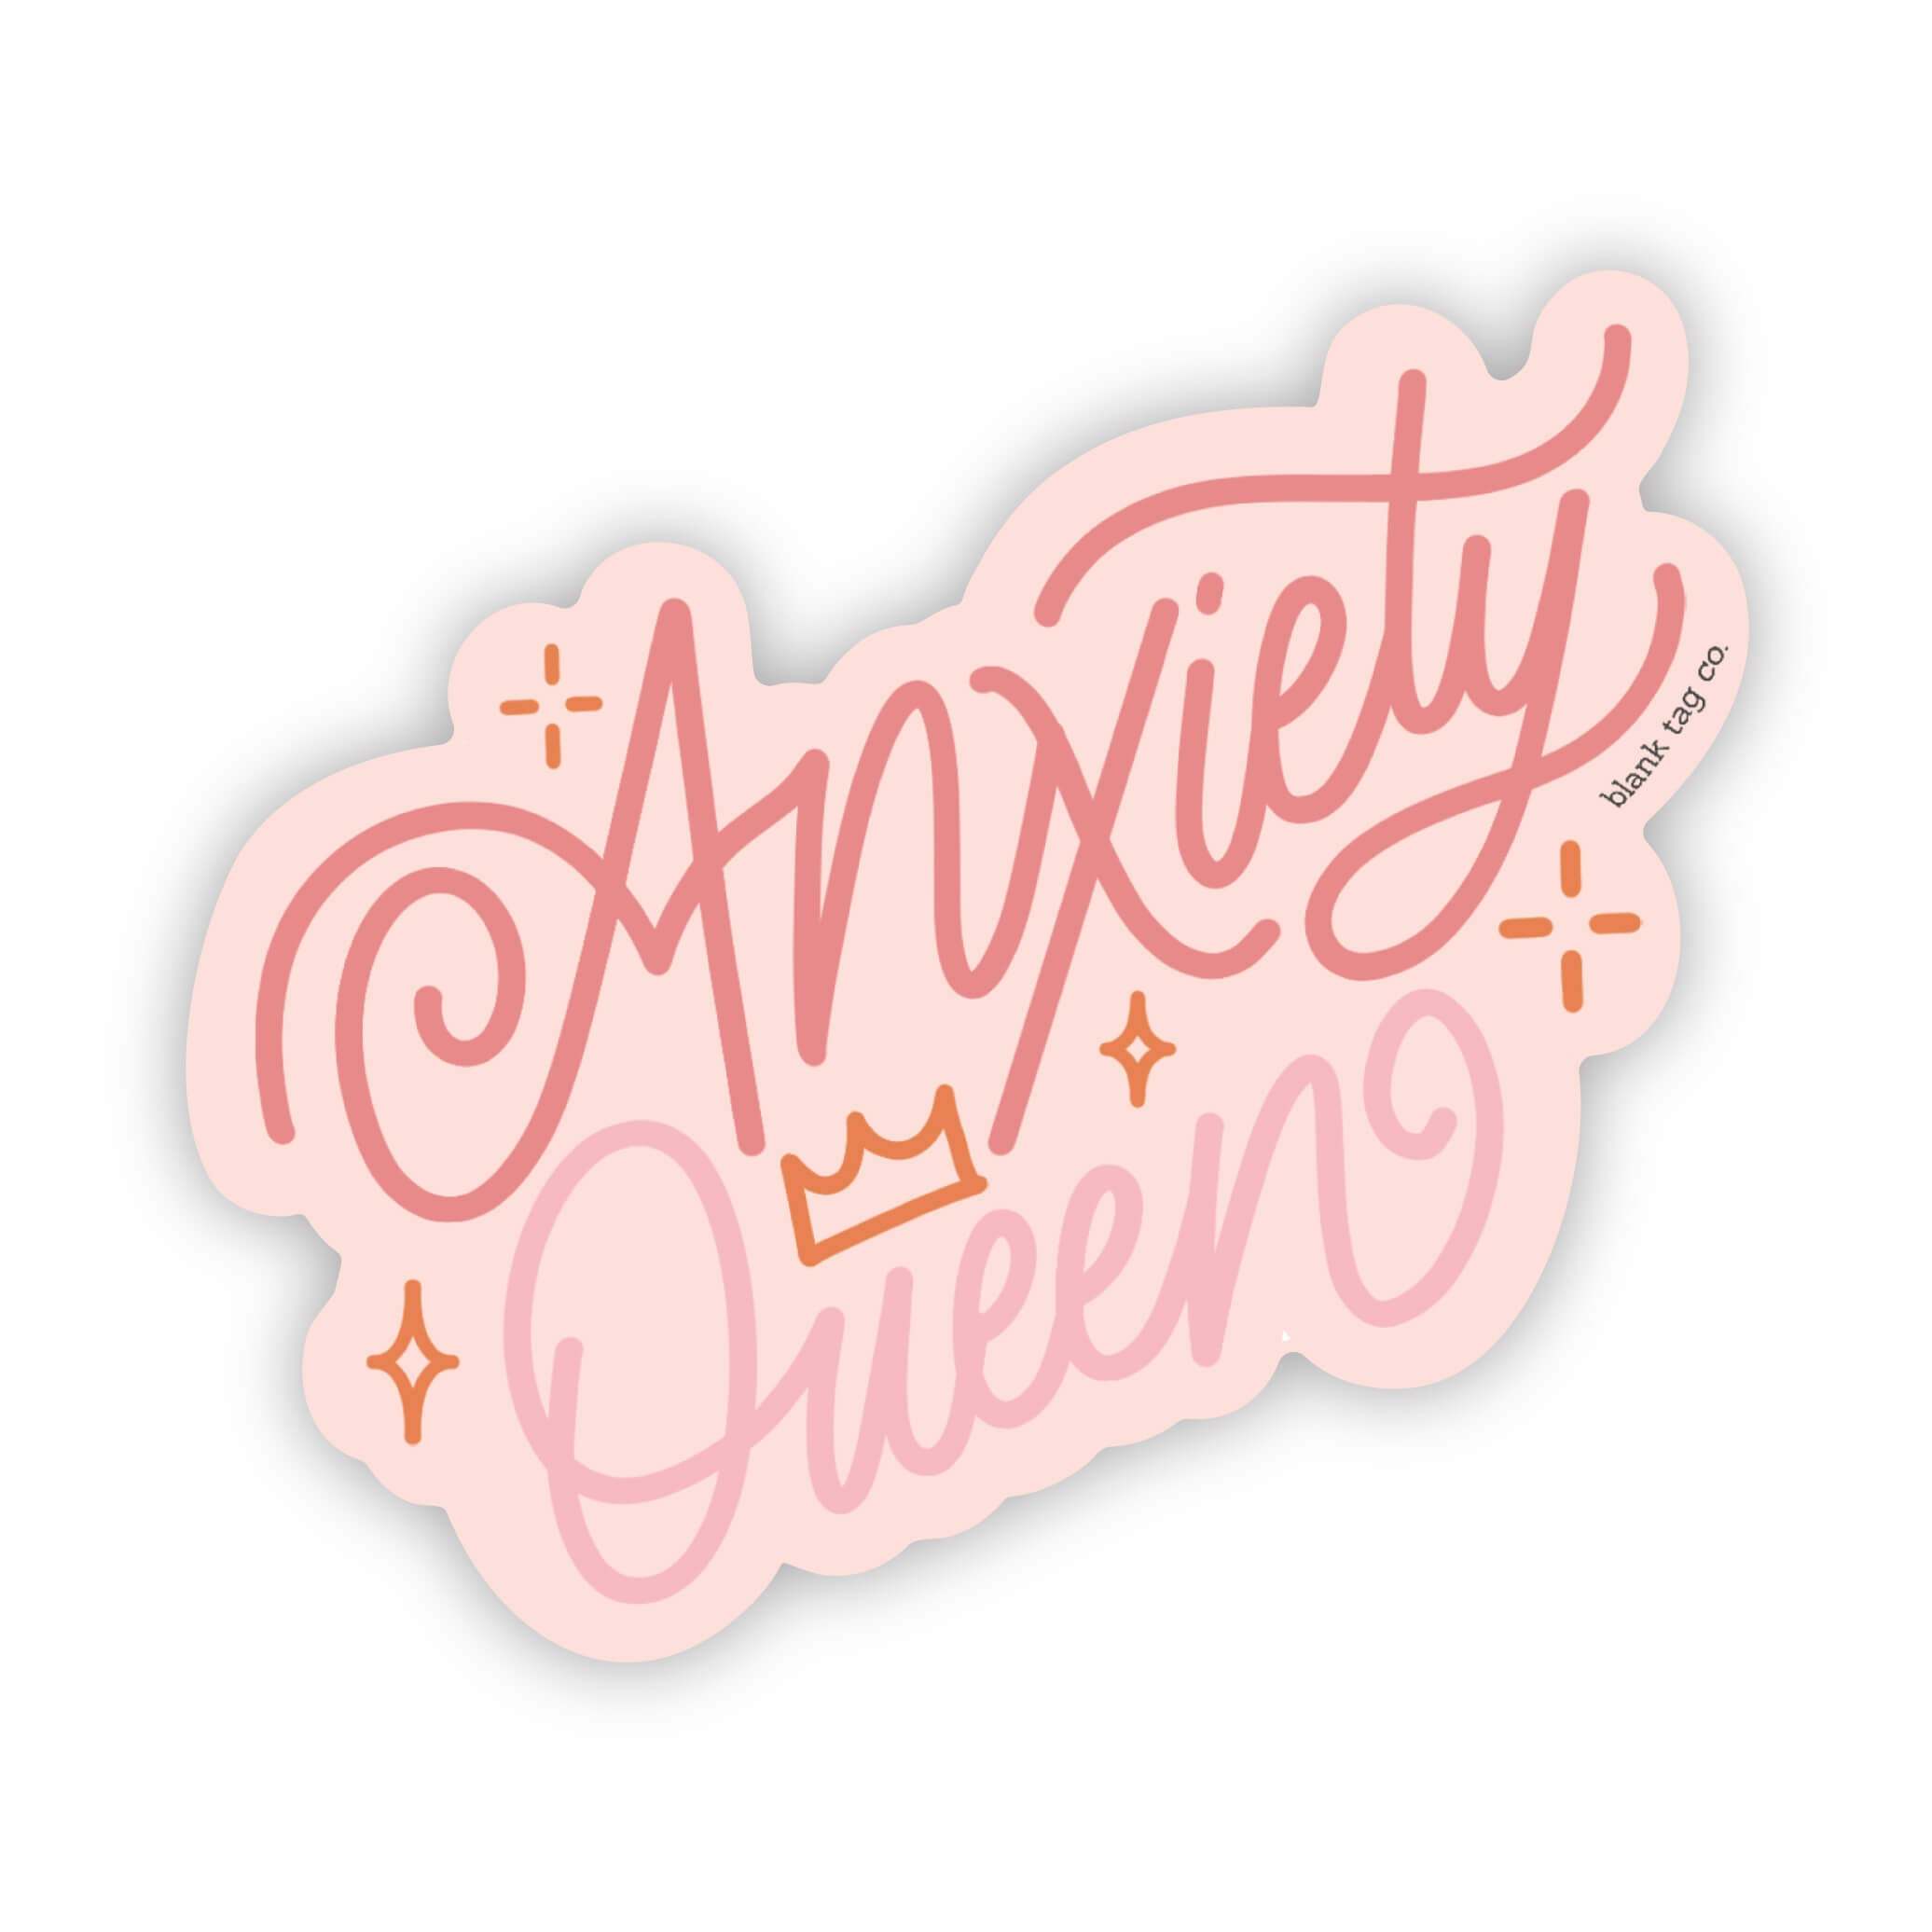 The Anxiety Queen Sticker